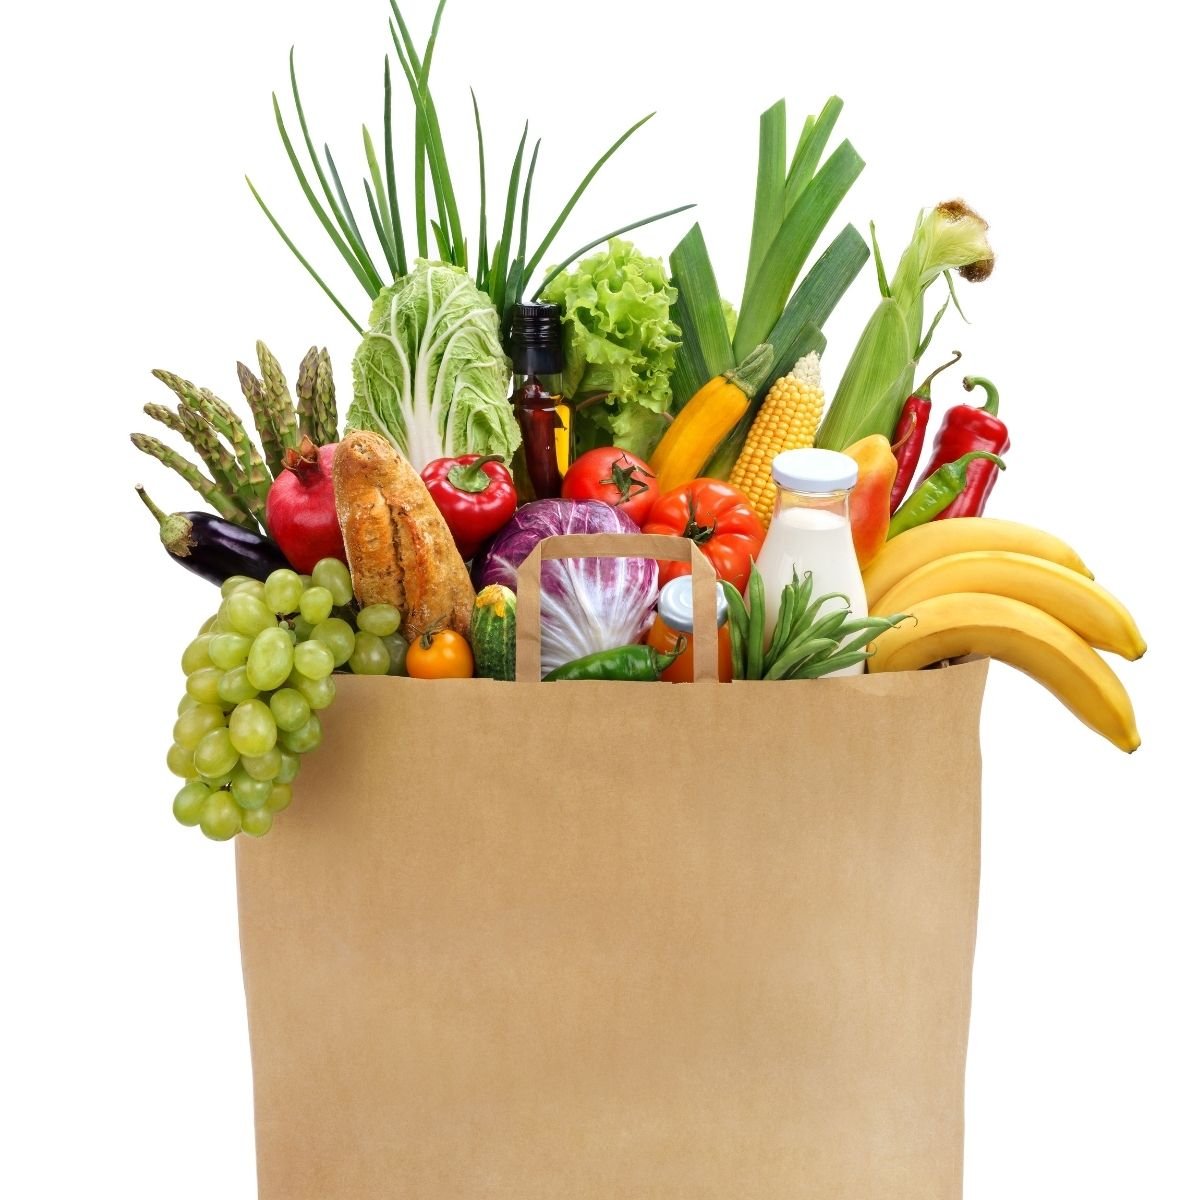 brown bag of groceries filled with items from a vegan grocery list like fresh fruits, and vegetables.